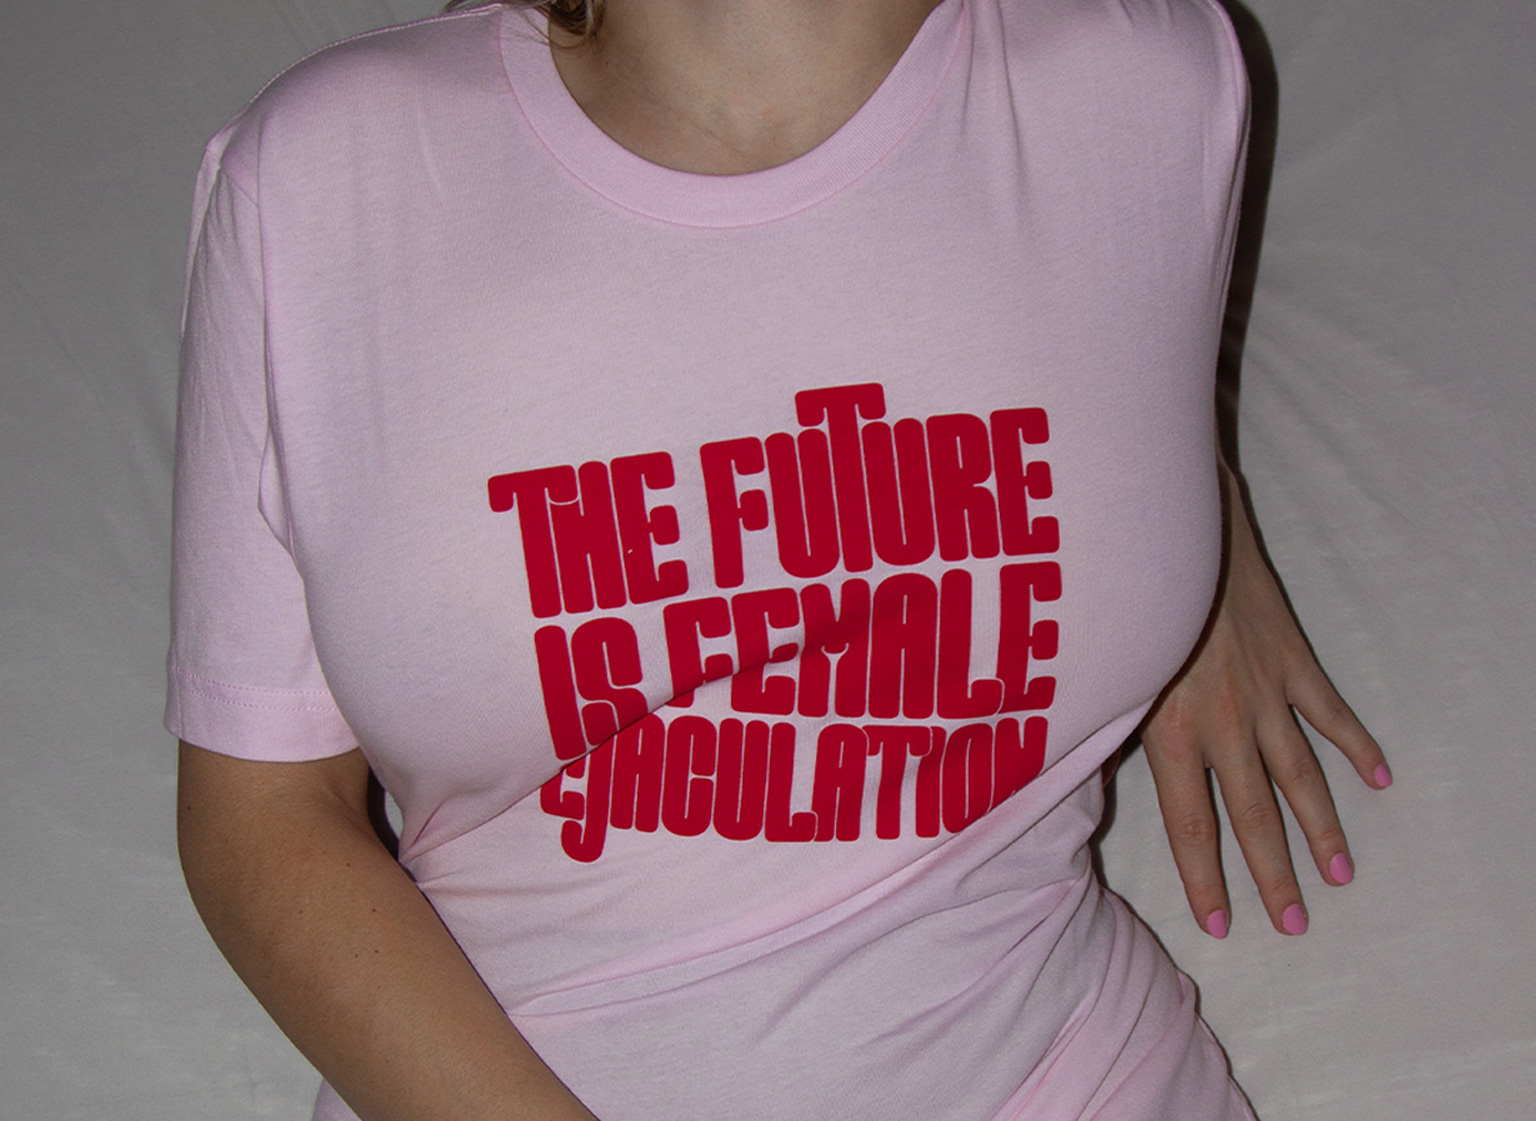 A Woman, sitting on a bed, wearing the shirt in pink with red text. Her face is cropped.